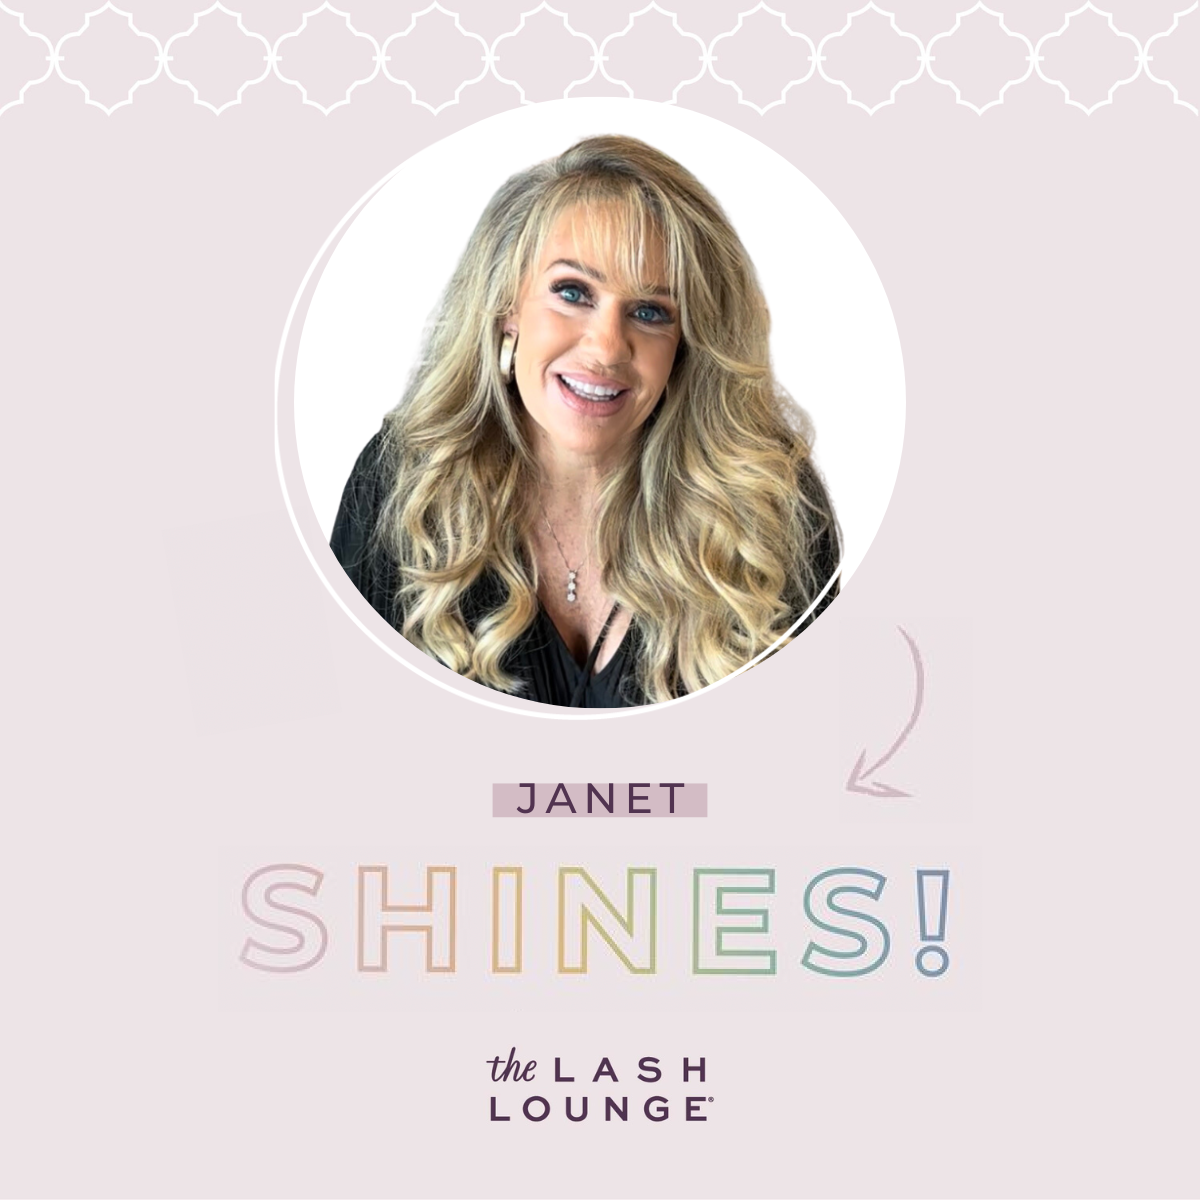 Janet, Lash Lounge guest, featured in a graphic template where the text reads "Janet SHINES!"